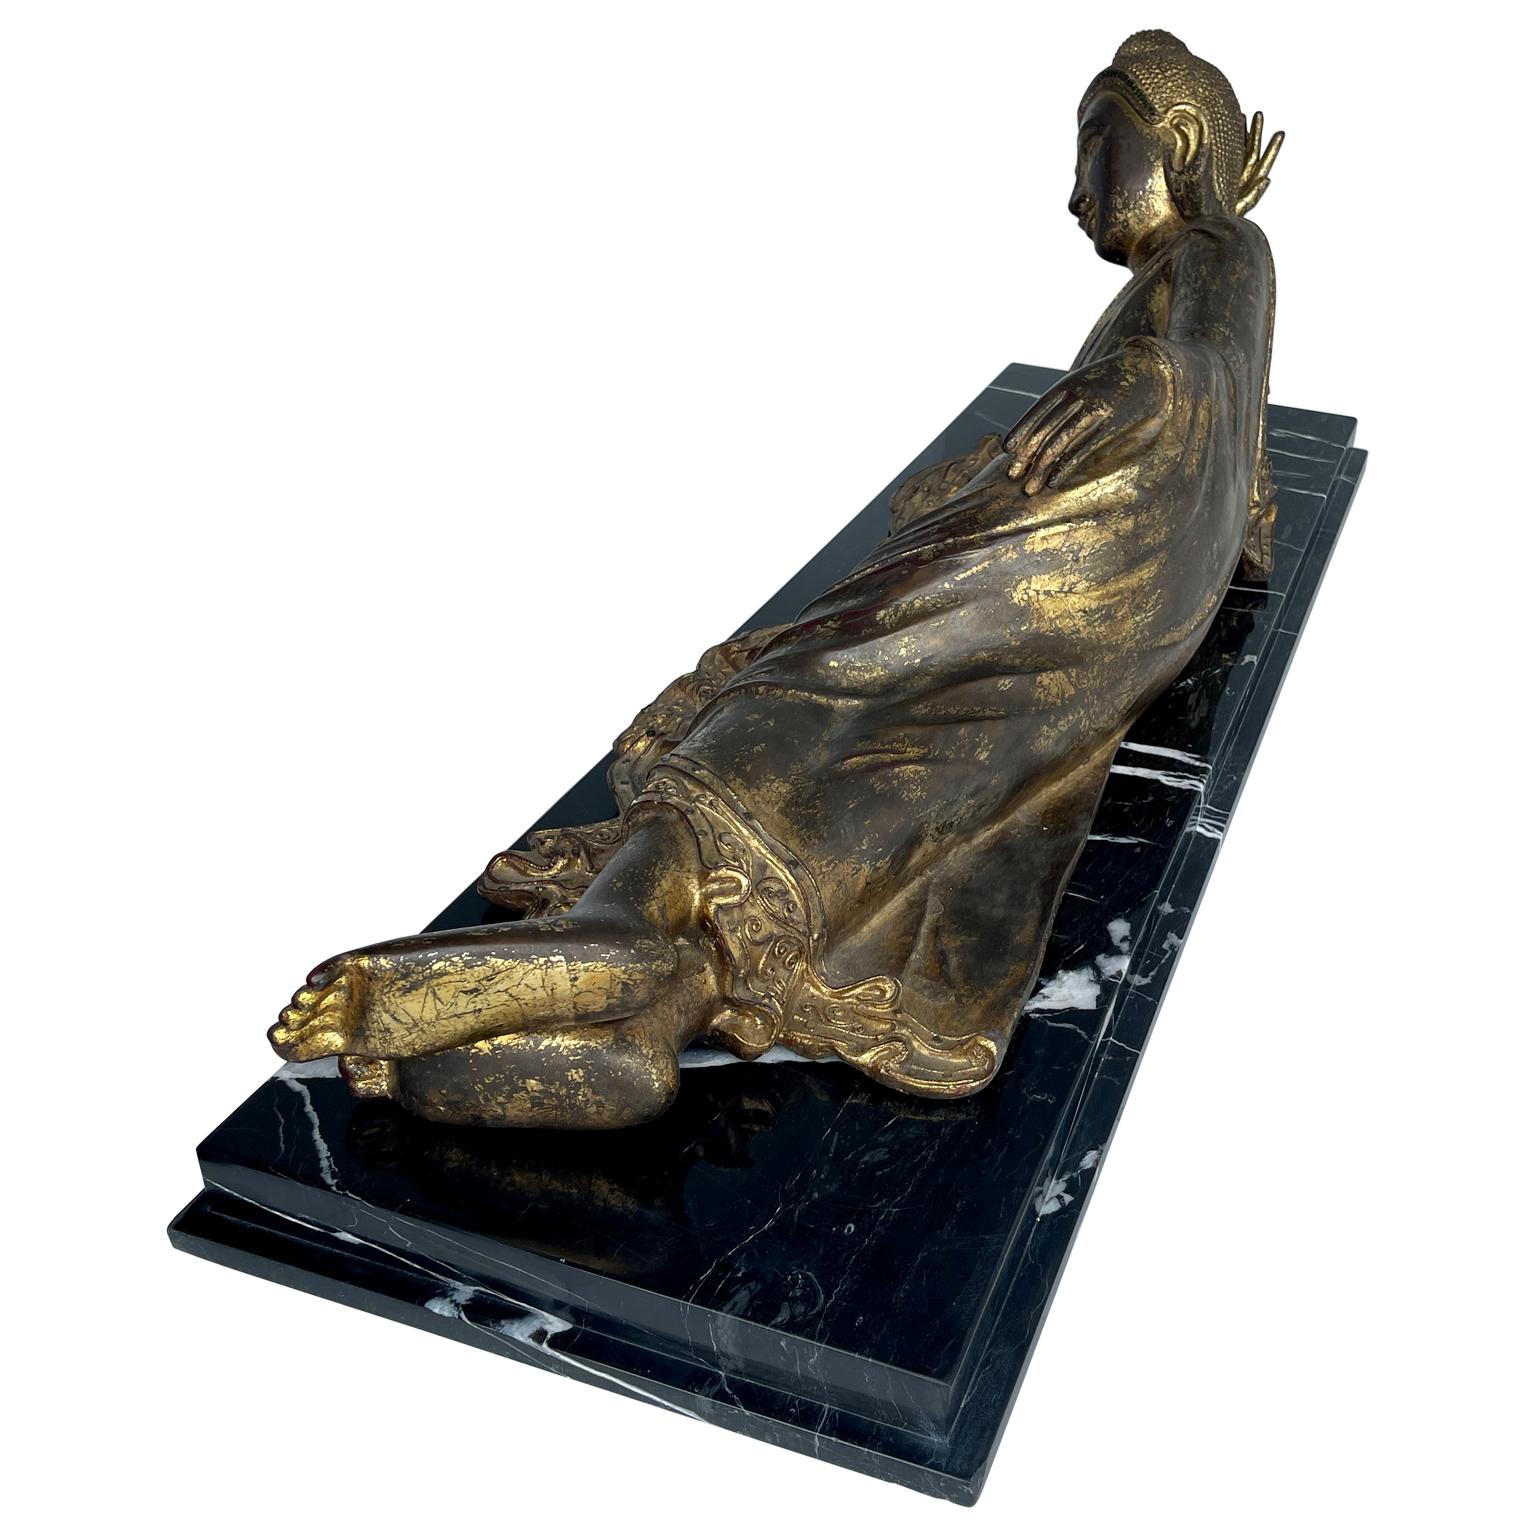 19th Century Large Mandalay Style Gilt Bronze Reclining Buddha Sculpture on Black Marble Base For Sale